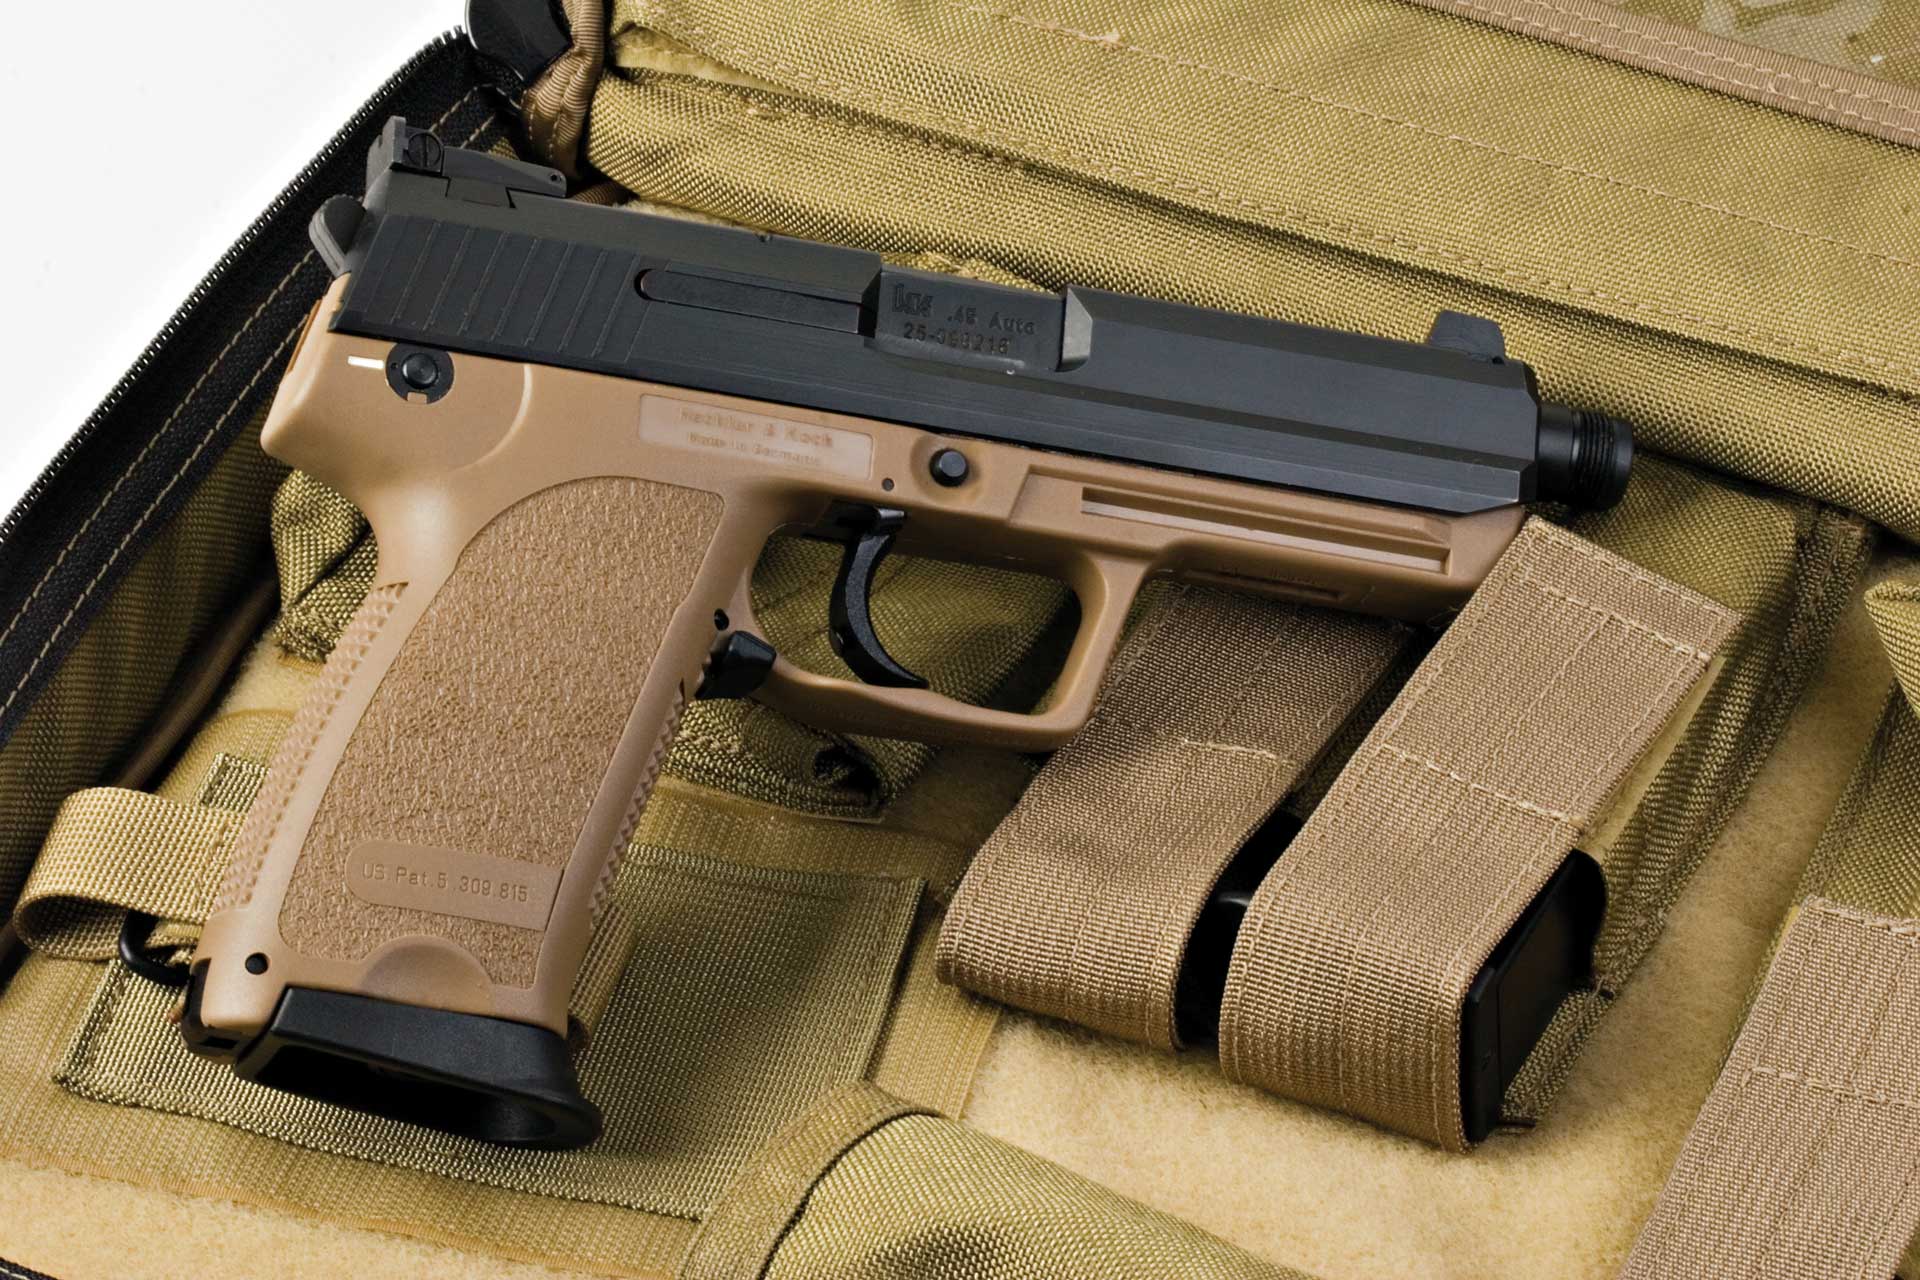 H&K USP Tactical pistol .45 FDE color right side with pouch accessories